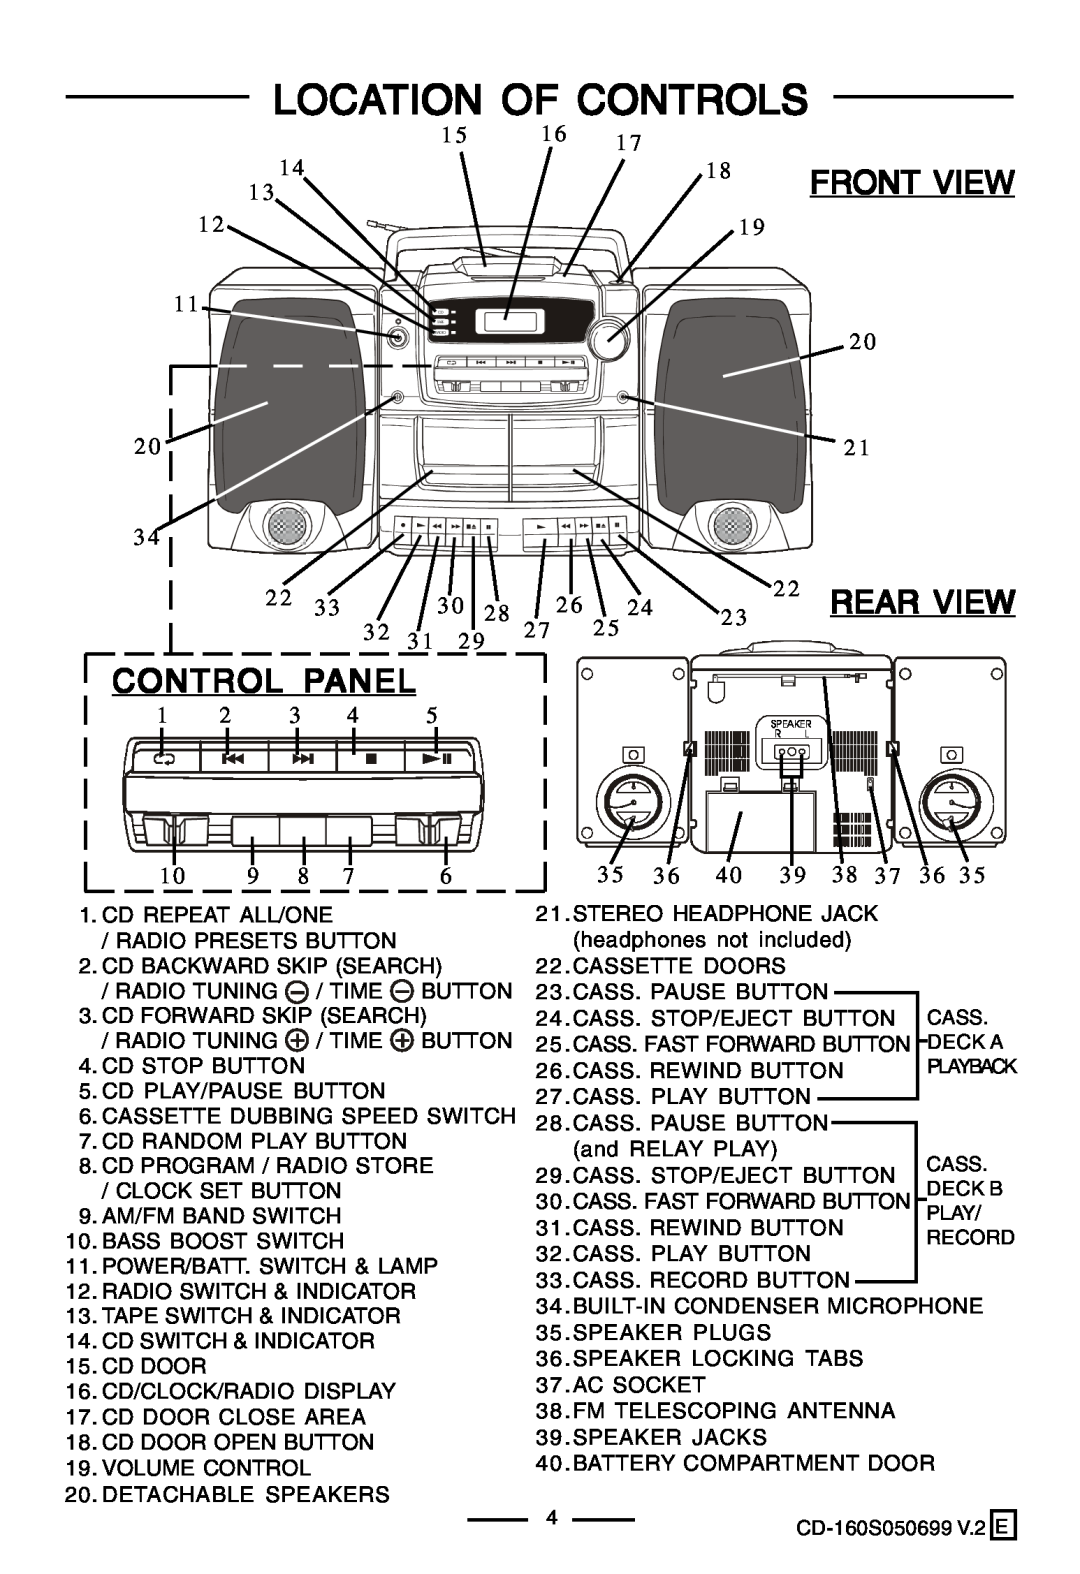 Lenoxx Electronics CD-160 manual Location Of Controls, Front View, Rear View, Control Panel 